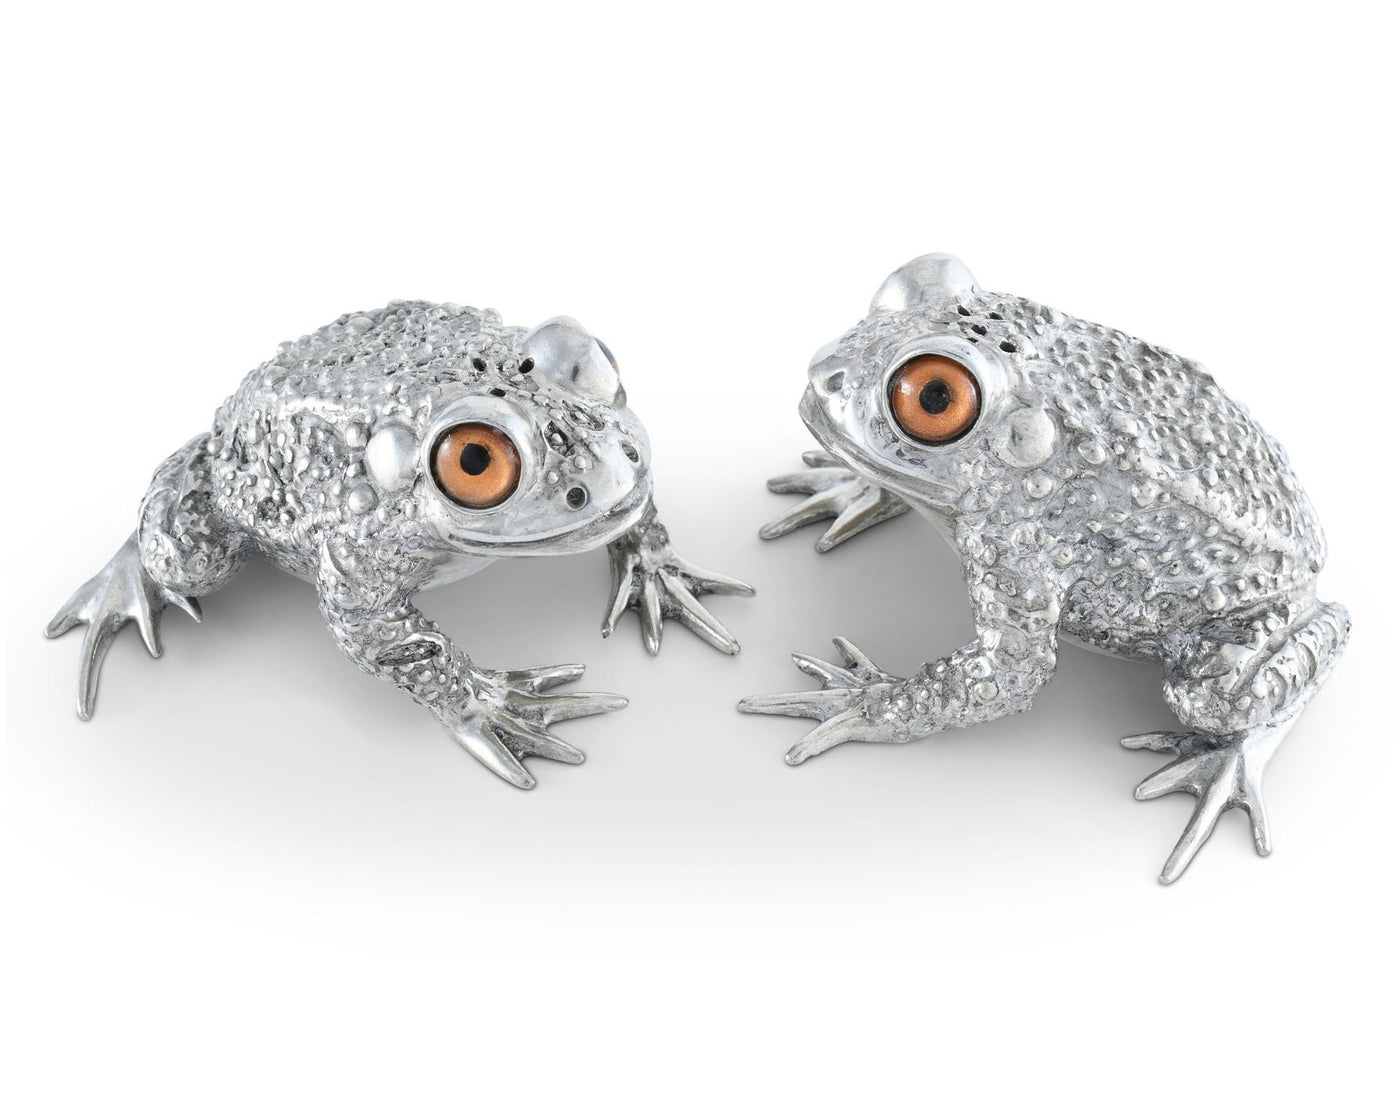 Toad Salt And Pepper